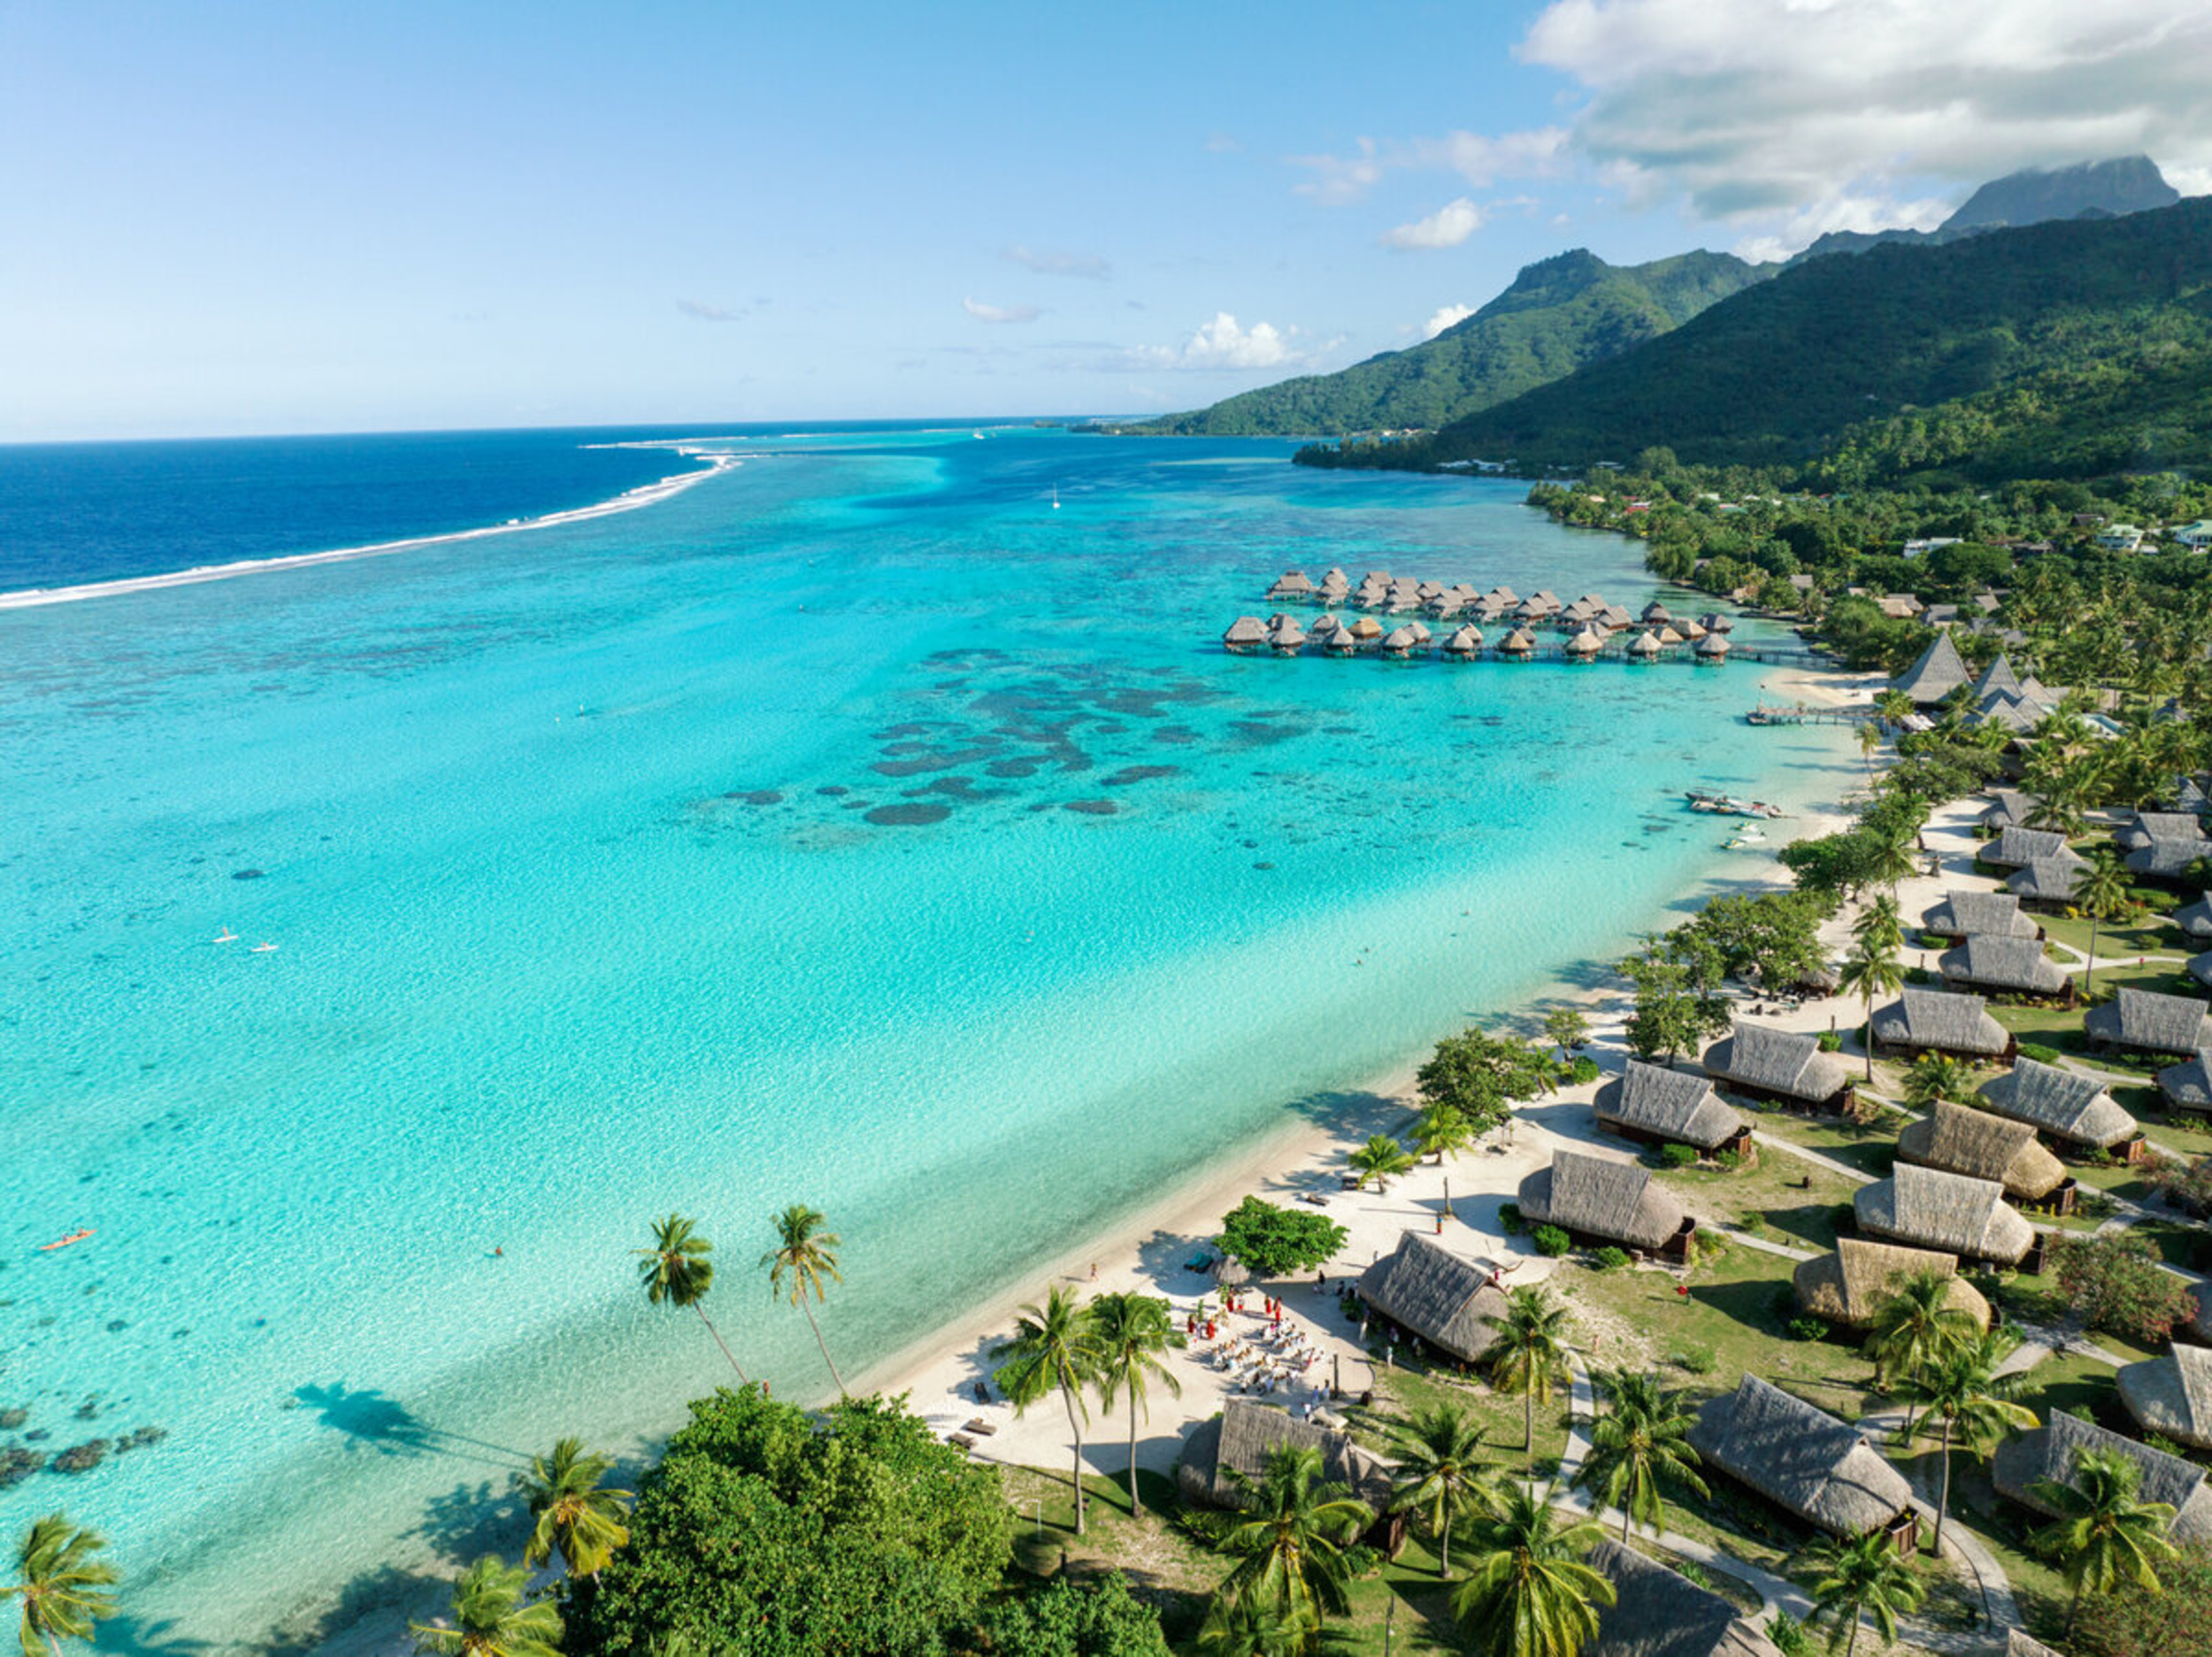 <p>While on the island of Moorea, you're going to want to check out Venus Point. The water is so clear you can see fish swimming from the cliffside above, the vast turquoise waters lulling you into a trance. Bring a mango, and a snorkel, and get ready to spend an entire afternoon in the ocean's embrace.</p><p>You may also like: <a href='https://www.yardbarker.com/lifestyle/articles/12_things_that_will_surprise_you_at_european_restaurants_031224/s1__38269648'>12 things that will surprise you at European restaurants</a></p>